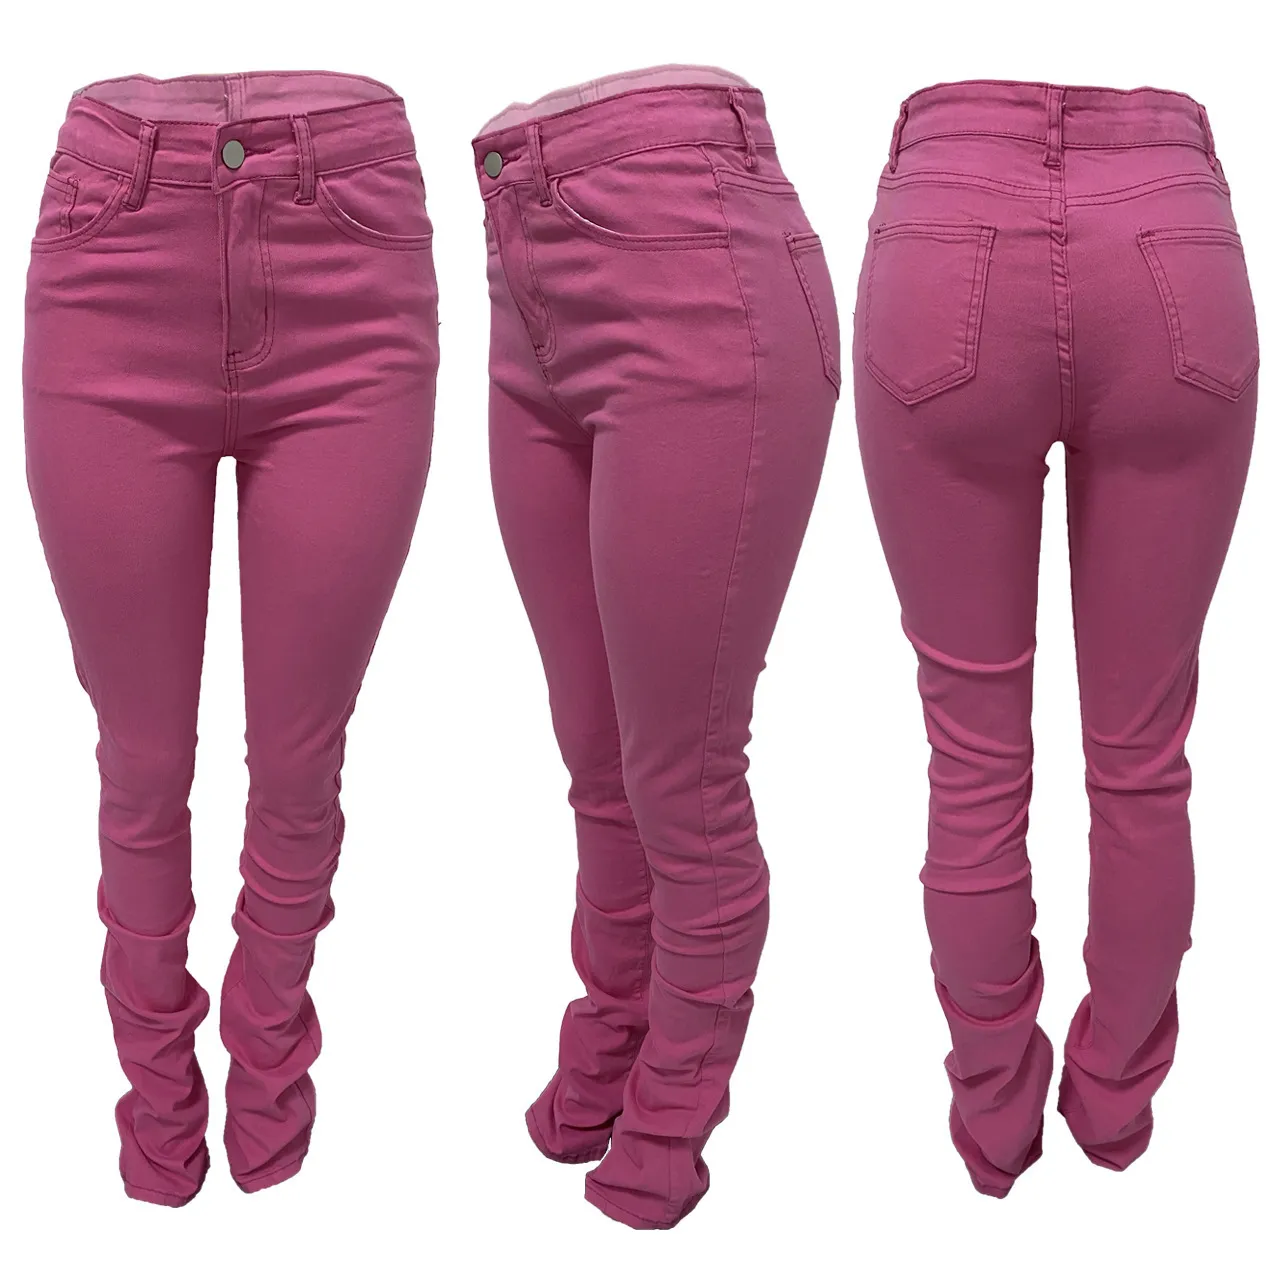 Women S Multi Color Washed And Versatile Jeans Pile Up Pants Designer Sports Casual Stacked Trousers Stack With Pockets New Fashion Pants